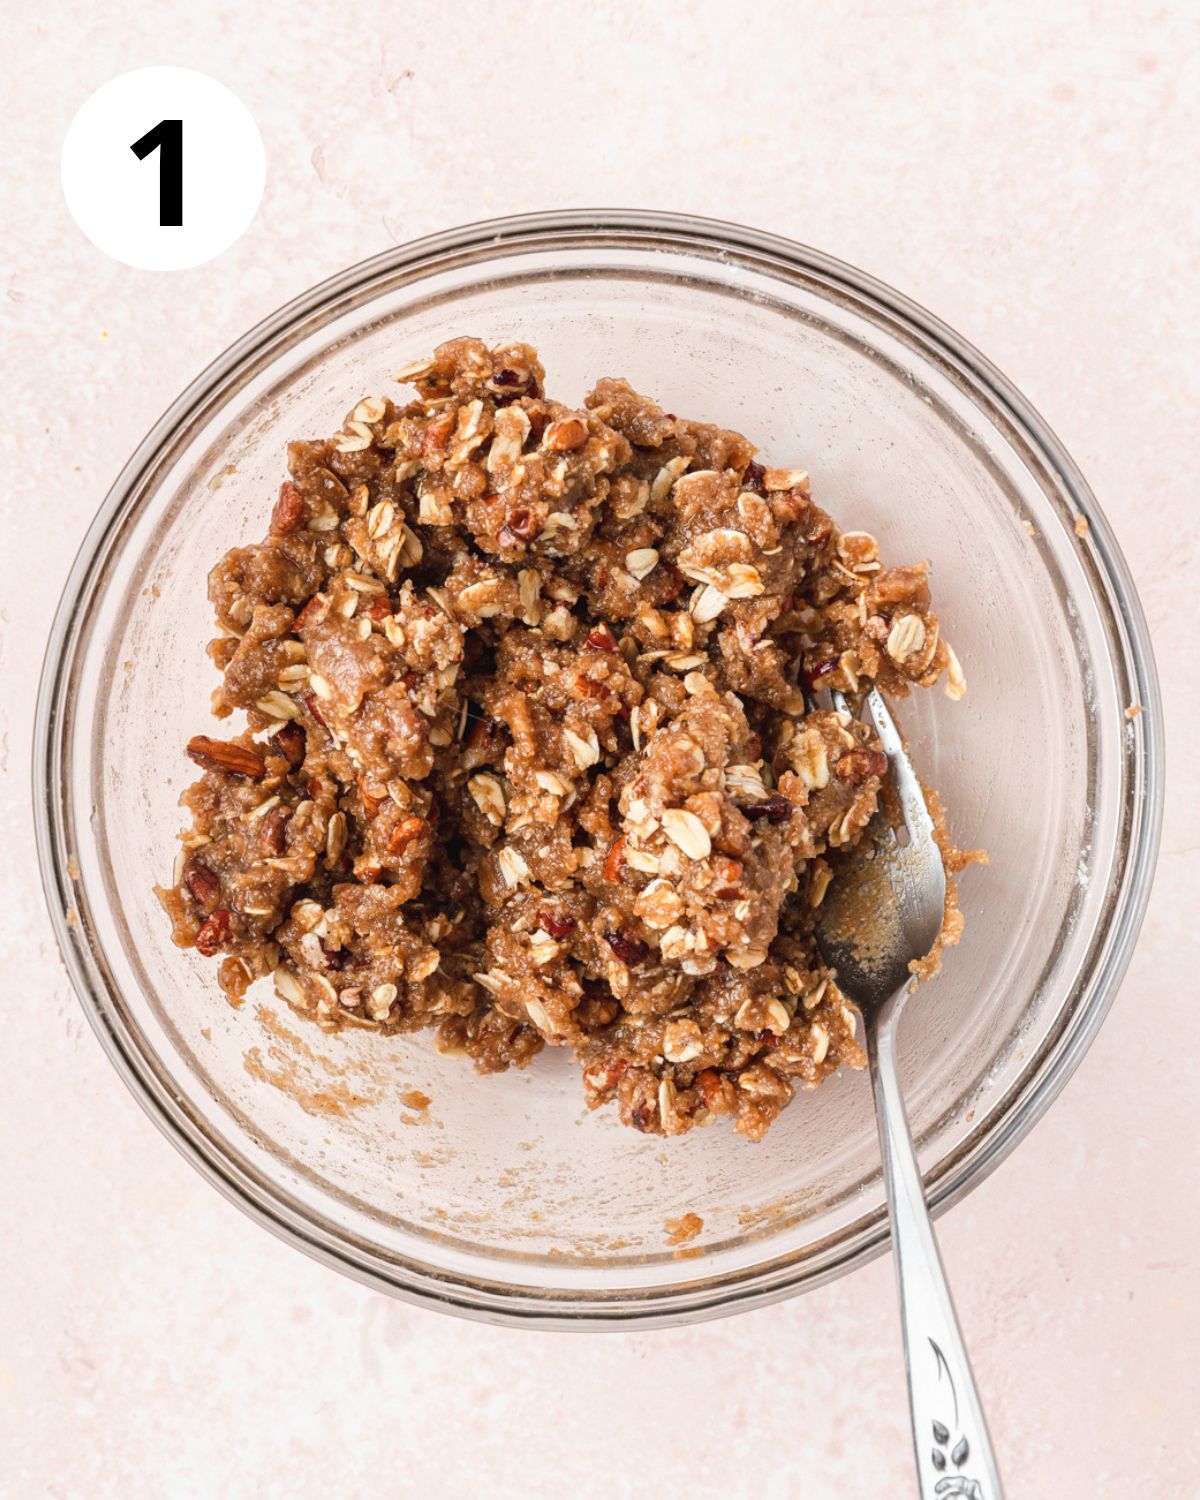 mixing together oat and pecan crisp topping.